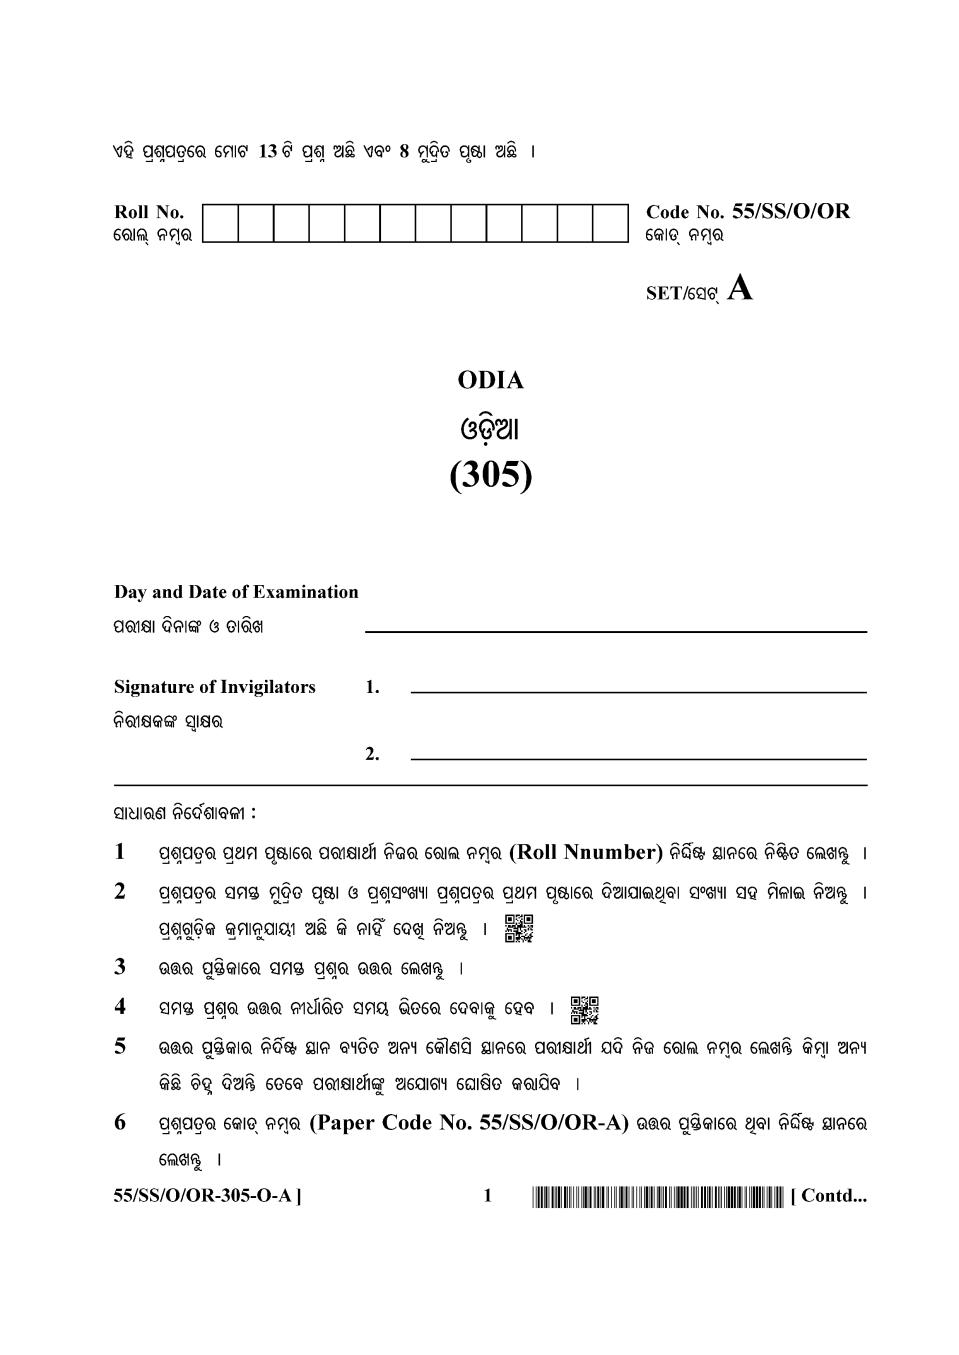 NIOS Class 12 Question Paper Oct 2017 - Odia - Page 1